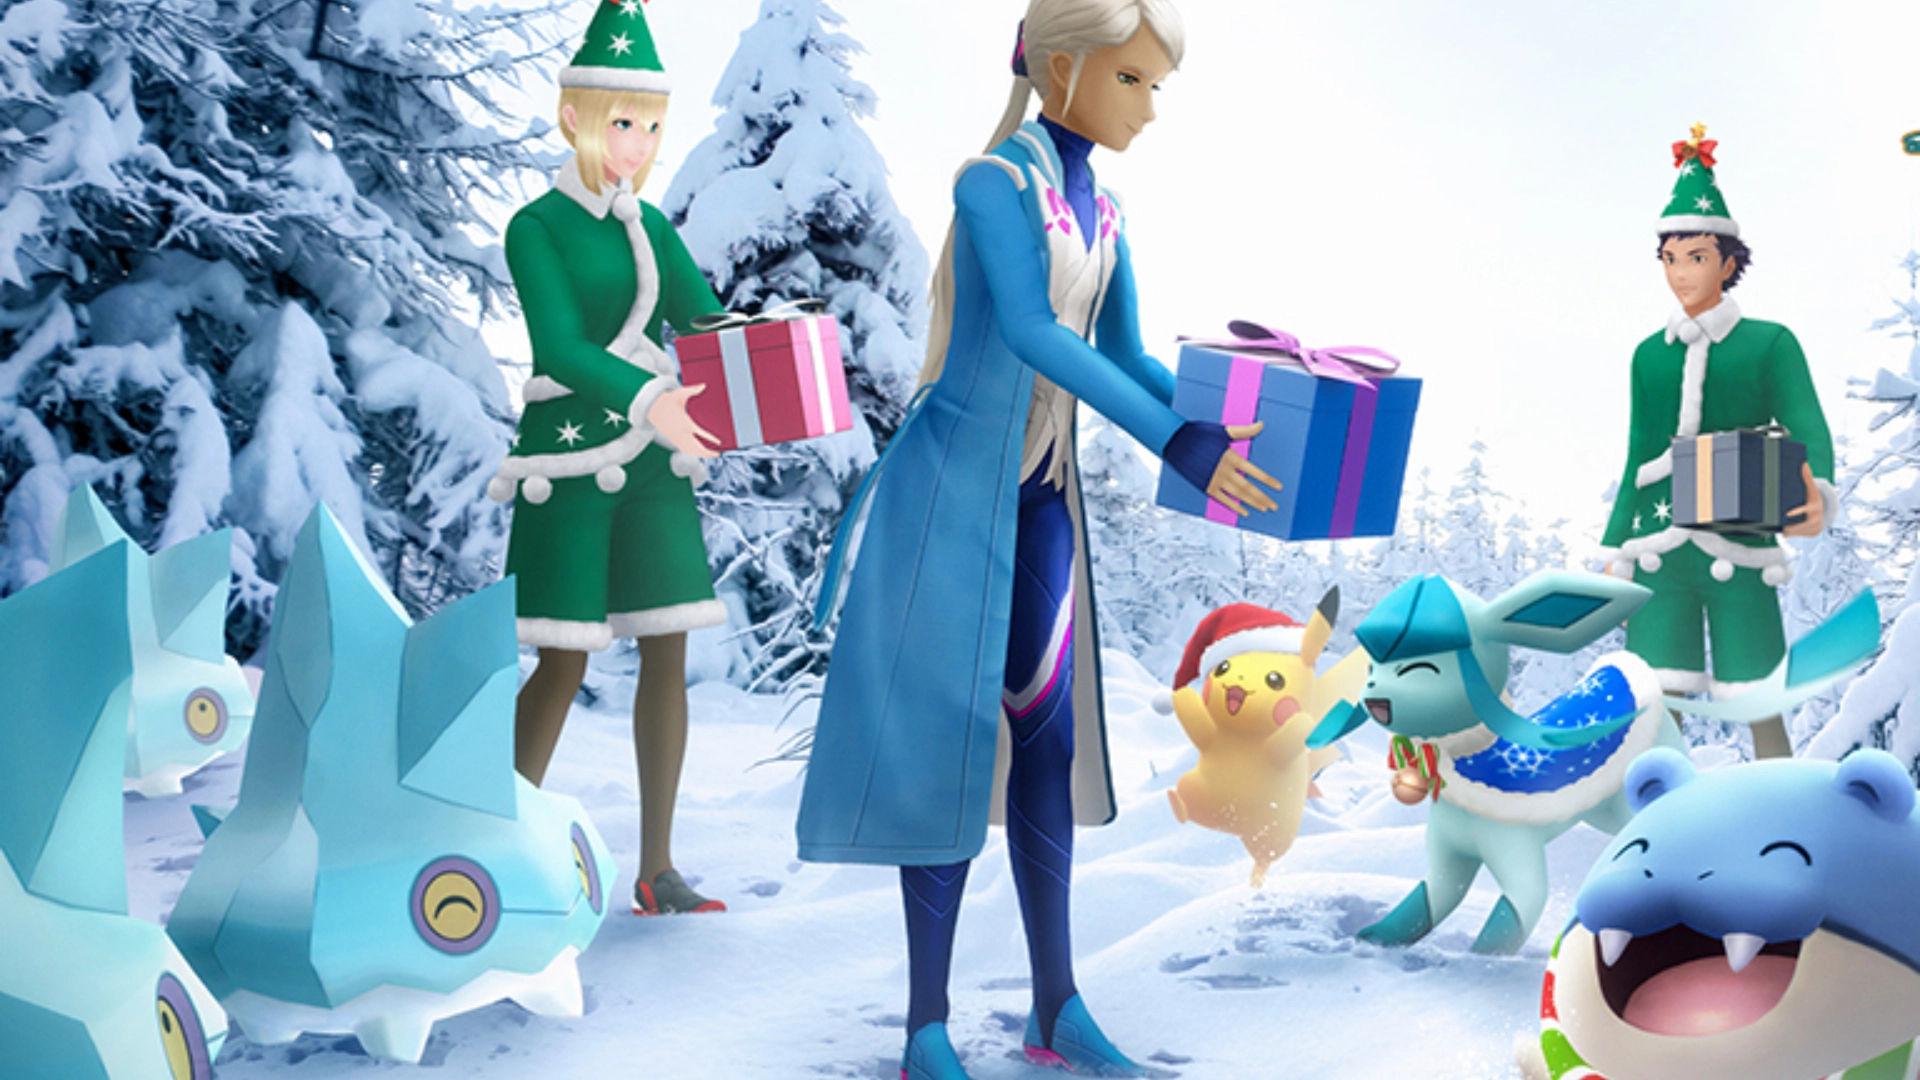 Pokémon Go’s New Year’s Event Introduces Some Snazzy Costumes thumbnail